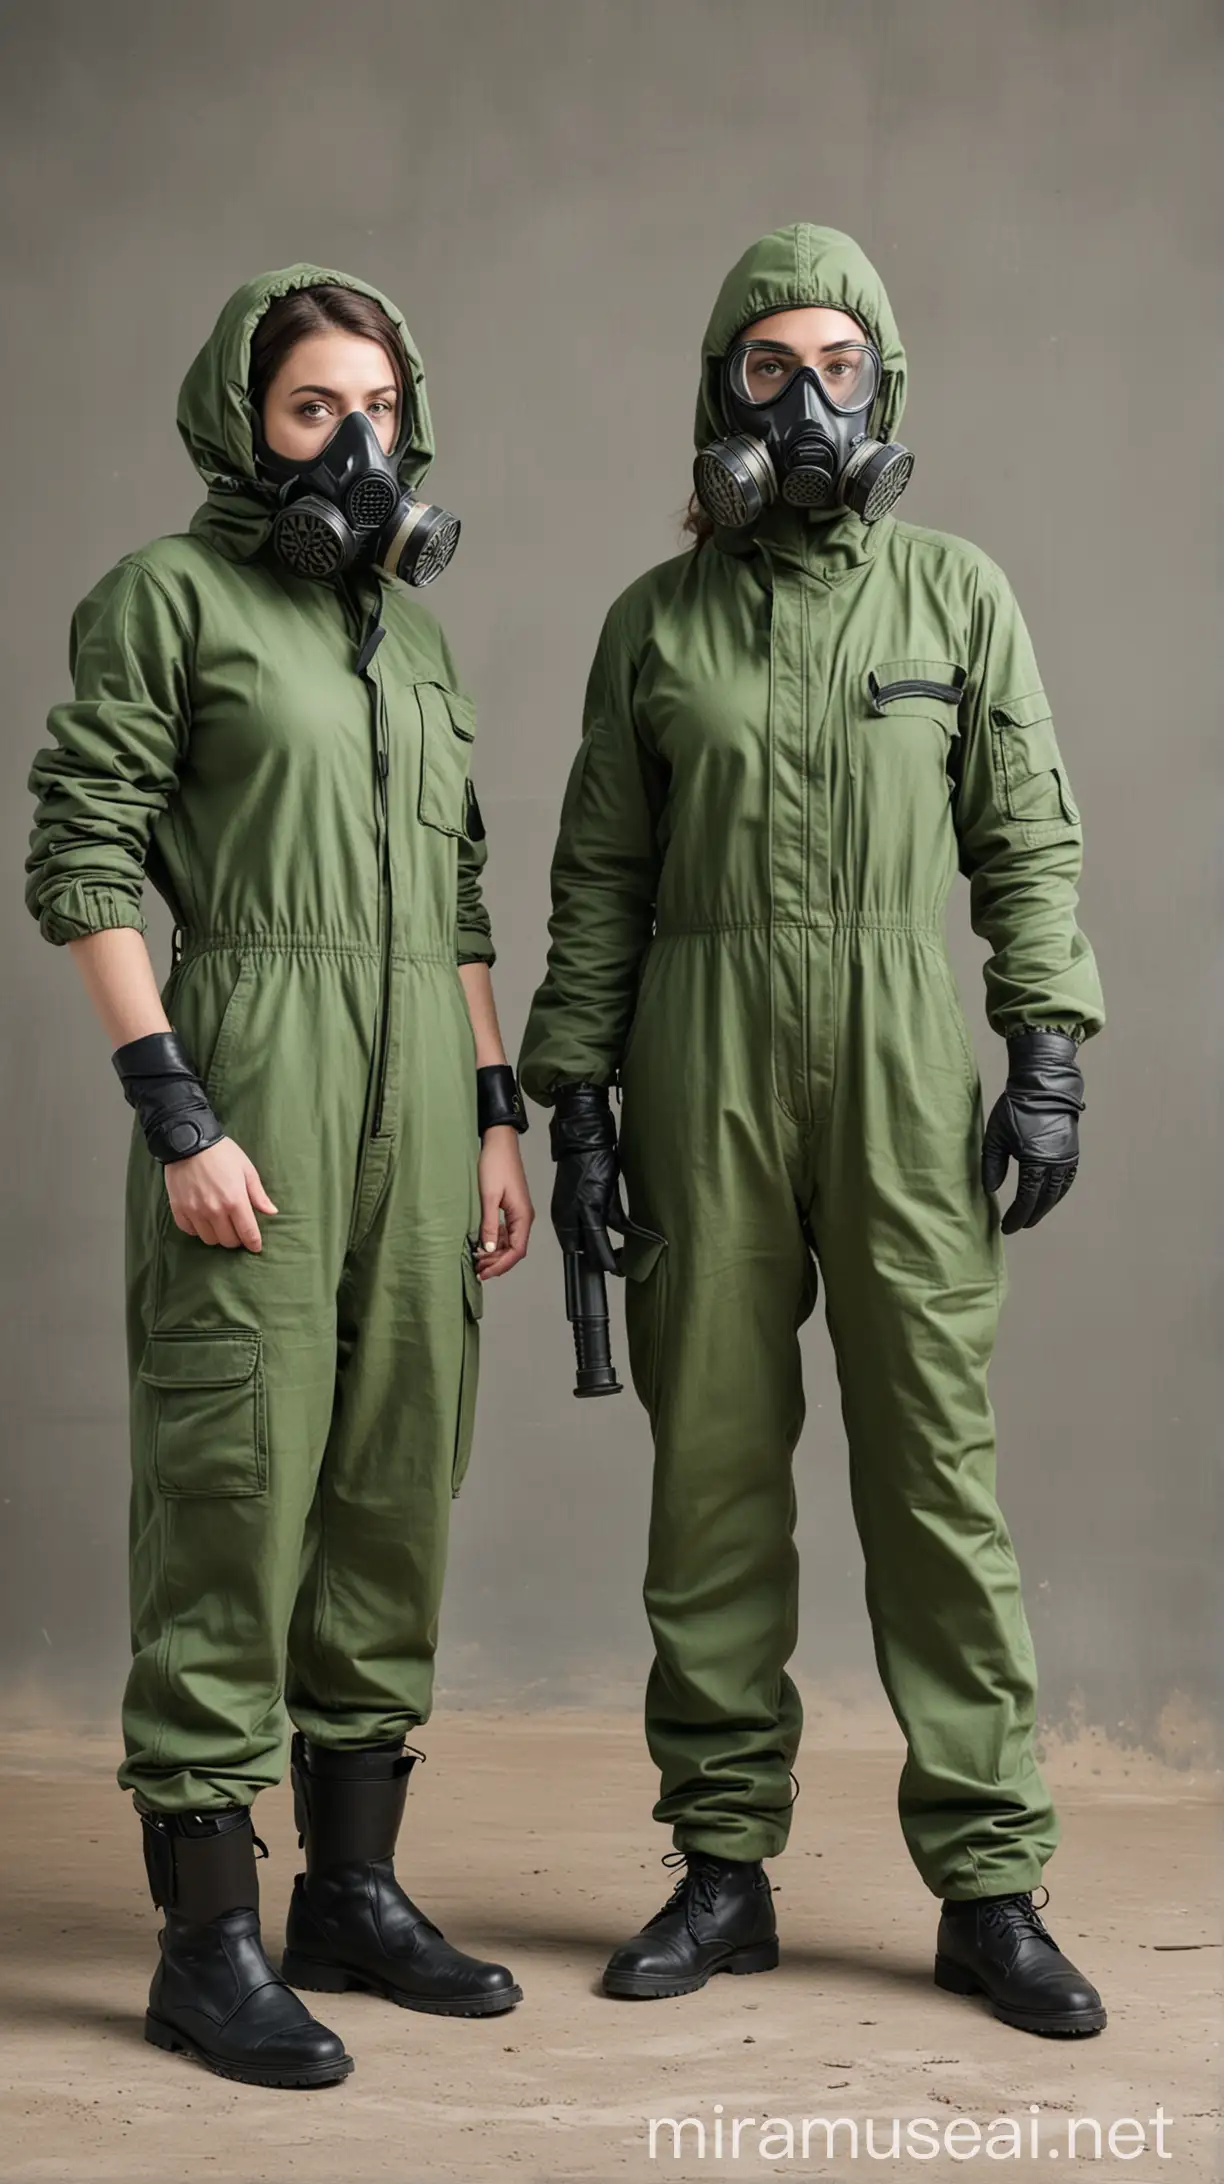 Couple in Protective Gear Standing Apart with Gas Masks